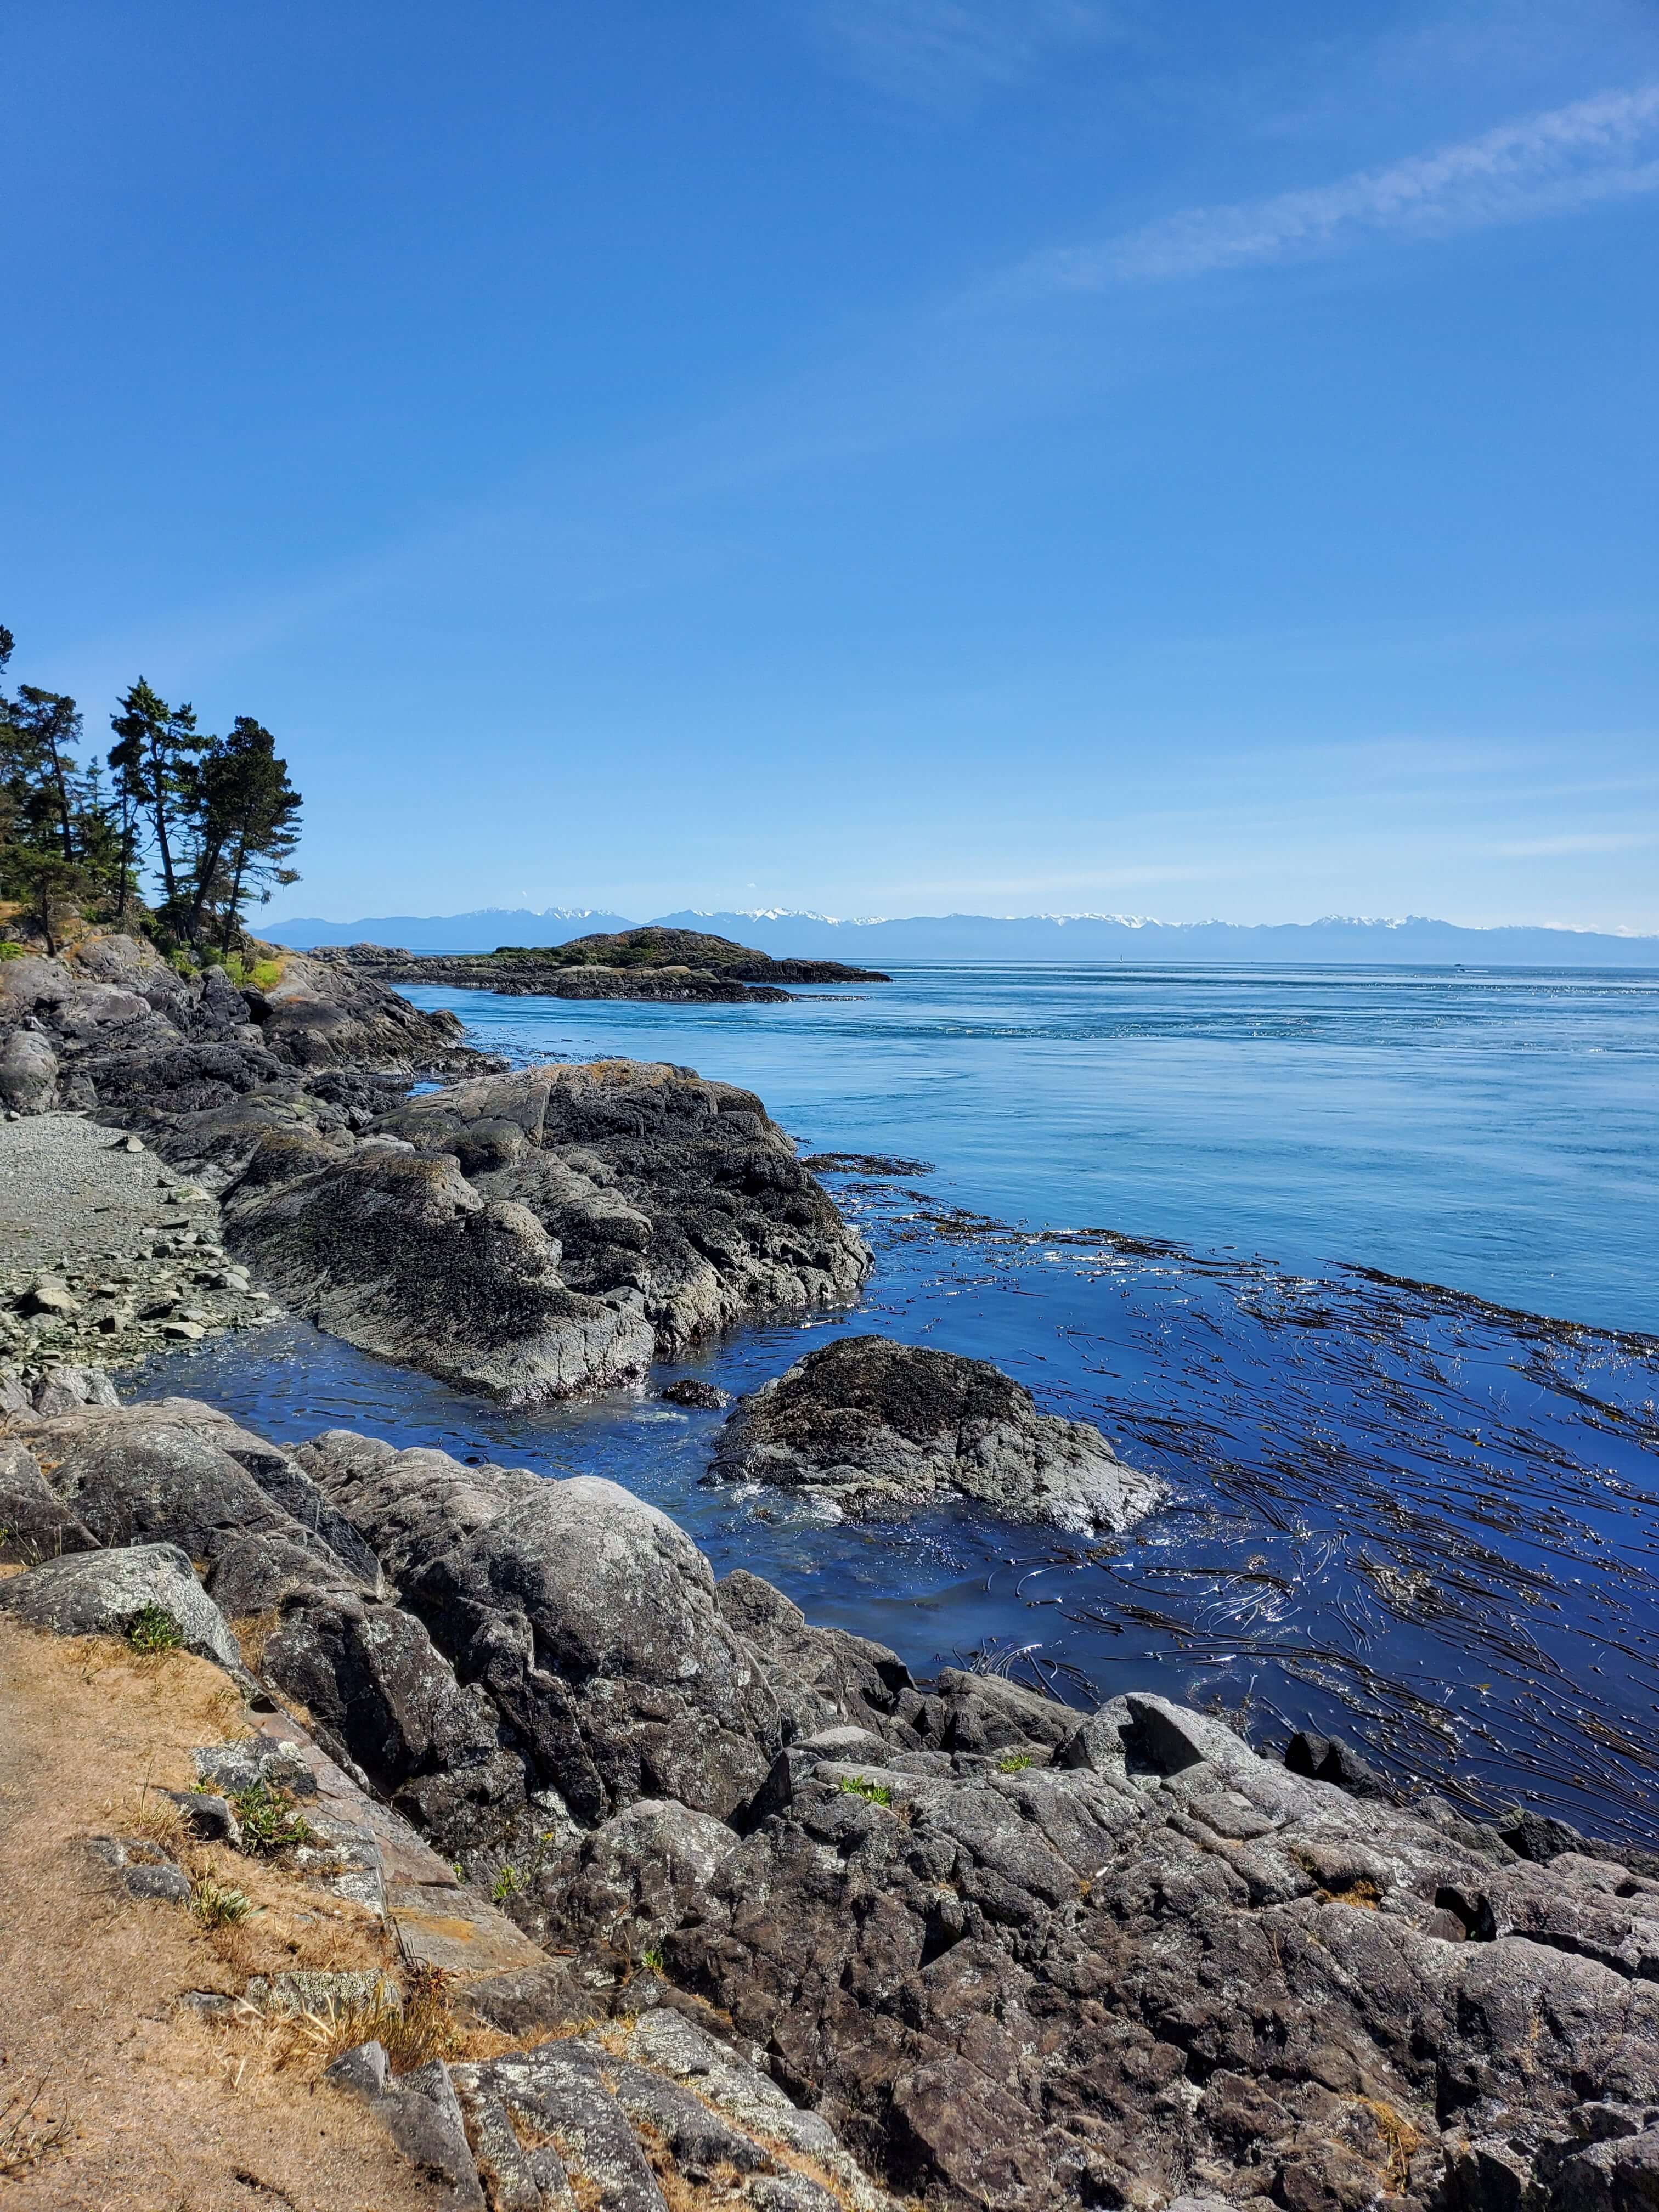 View of the Olympic Mountains from Shark Reef Sanctuary on Lopez Island